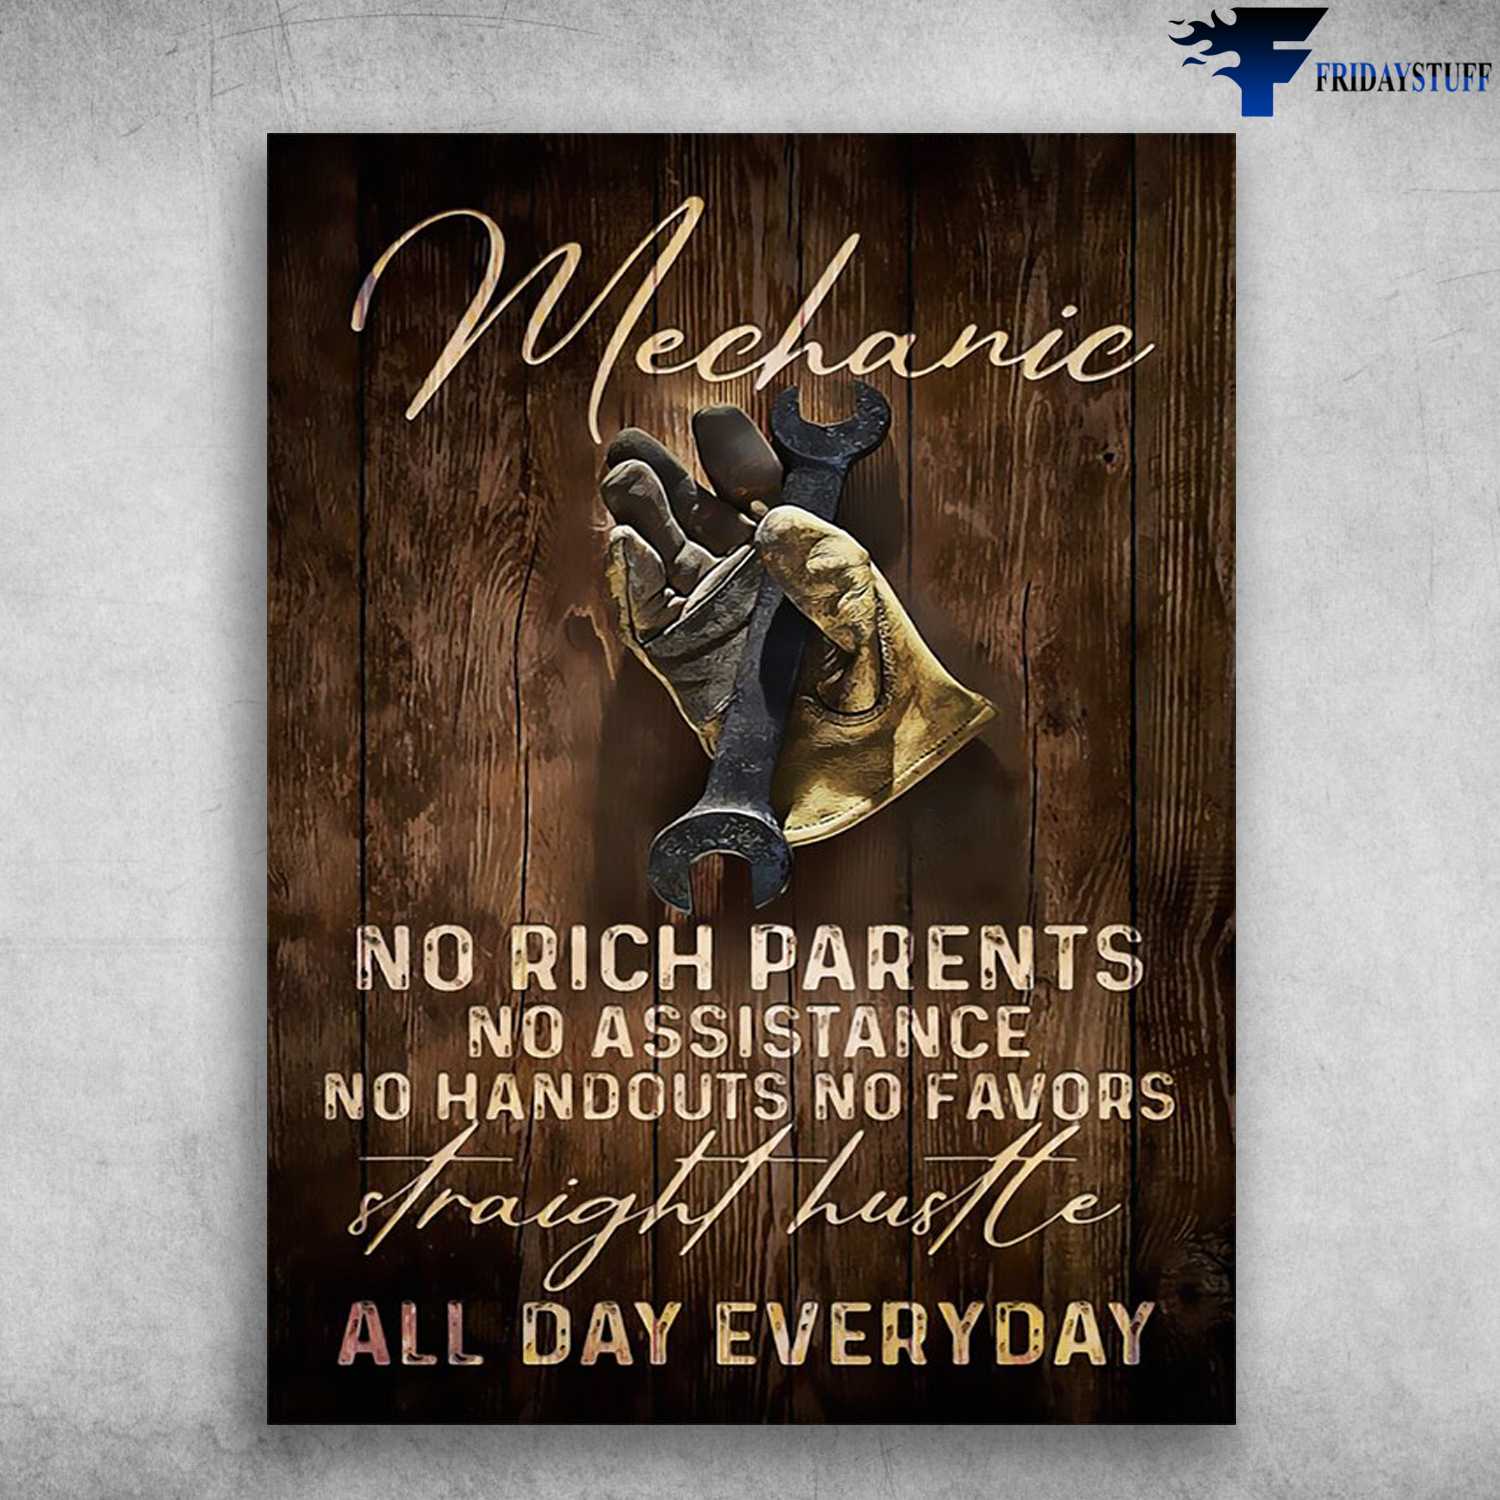 Mechanis Poster, Mechanic Mam - No Rich Parents, No Assistance, No Handouts No Favors, Straight Hustle, All Day Everyday